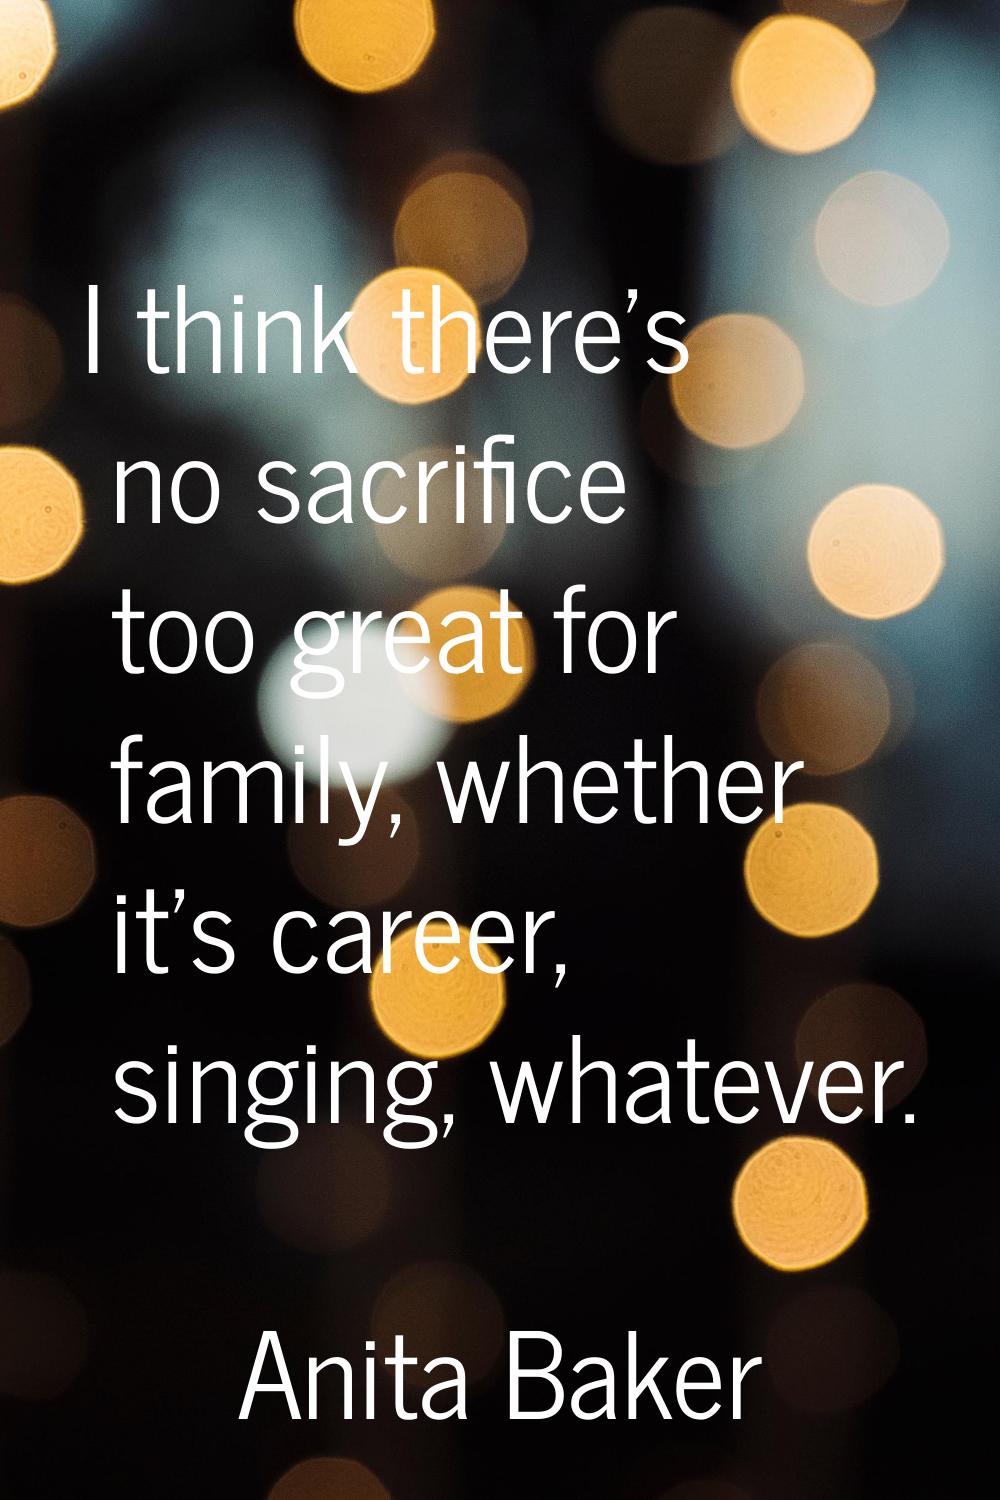 I think there's no sacrifice too great for family, whether it's career, singing, whatever.